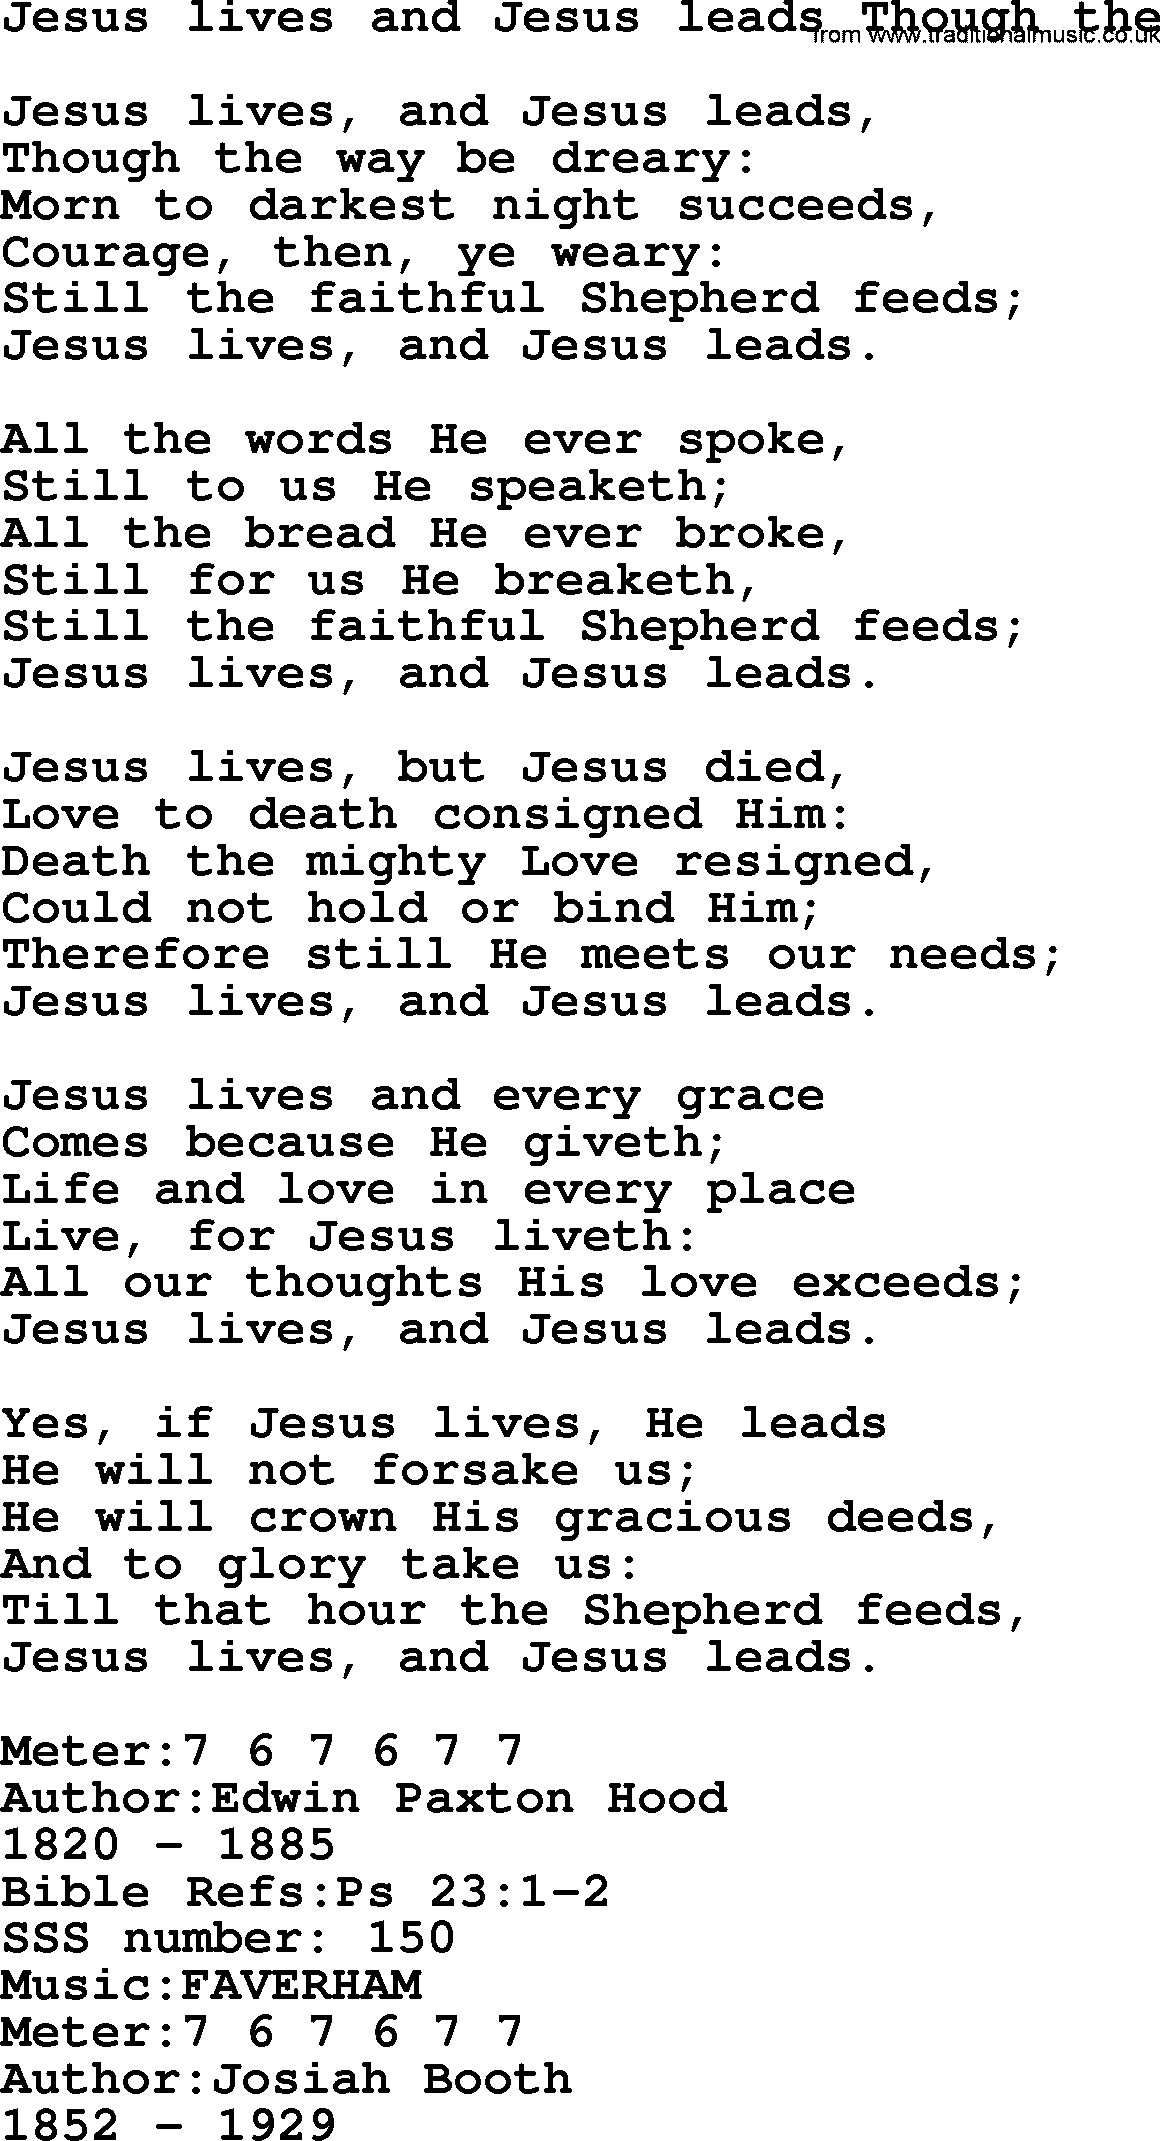 Sacred Songs and Solos complete, 1200 Hymns, title: Jesus Lives And Jesus Leads Though The, lyrics and PDF